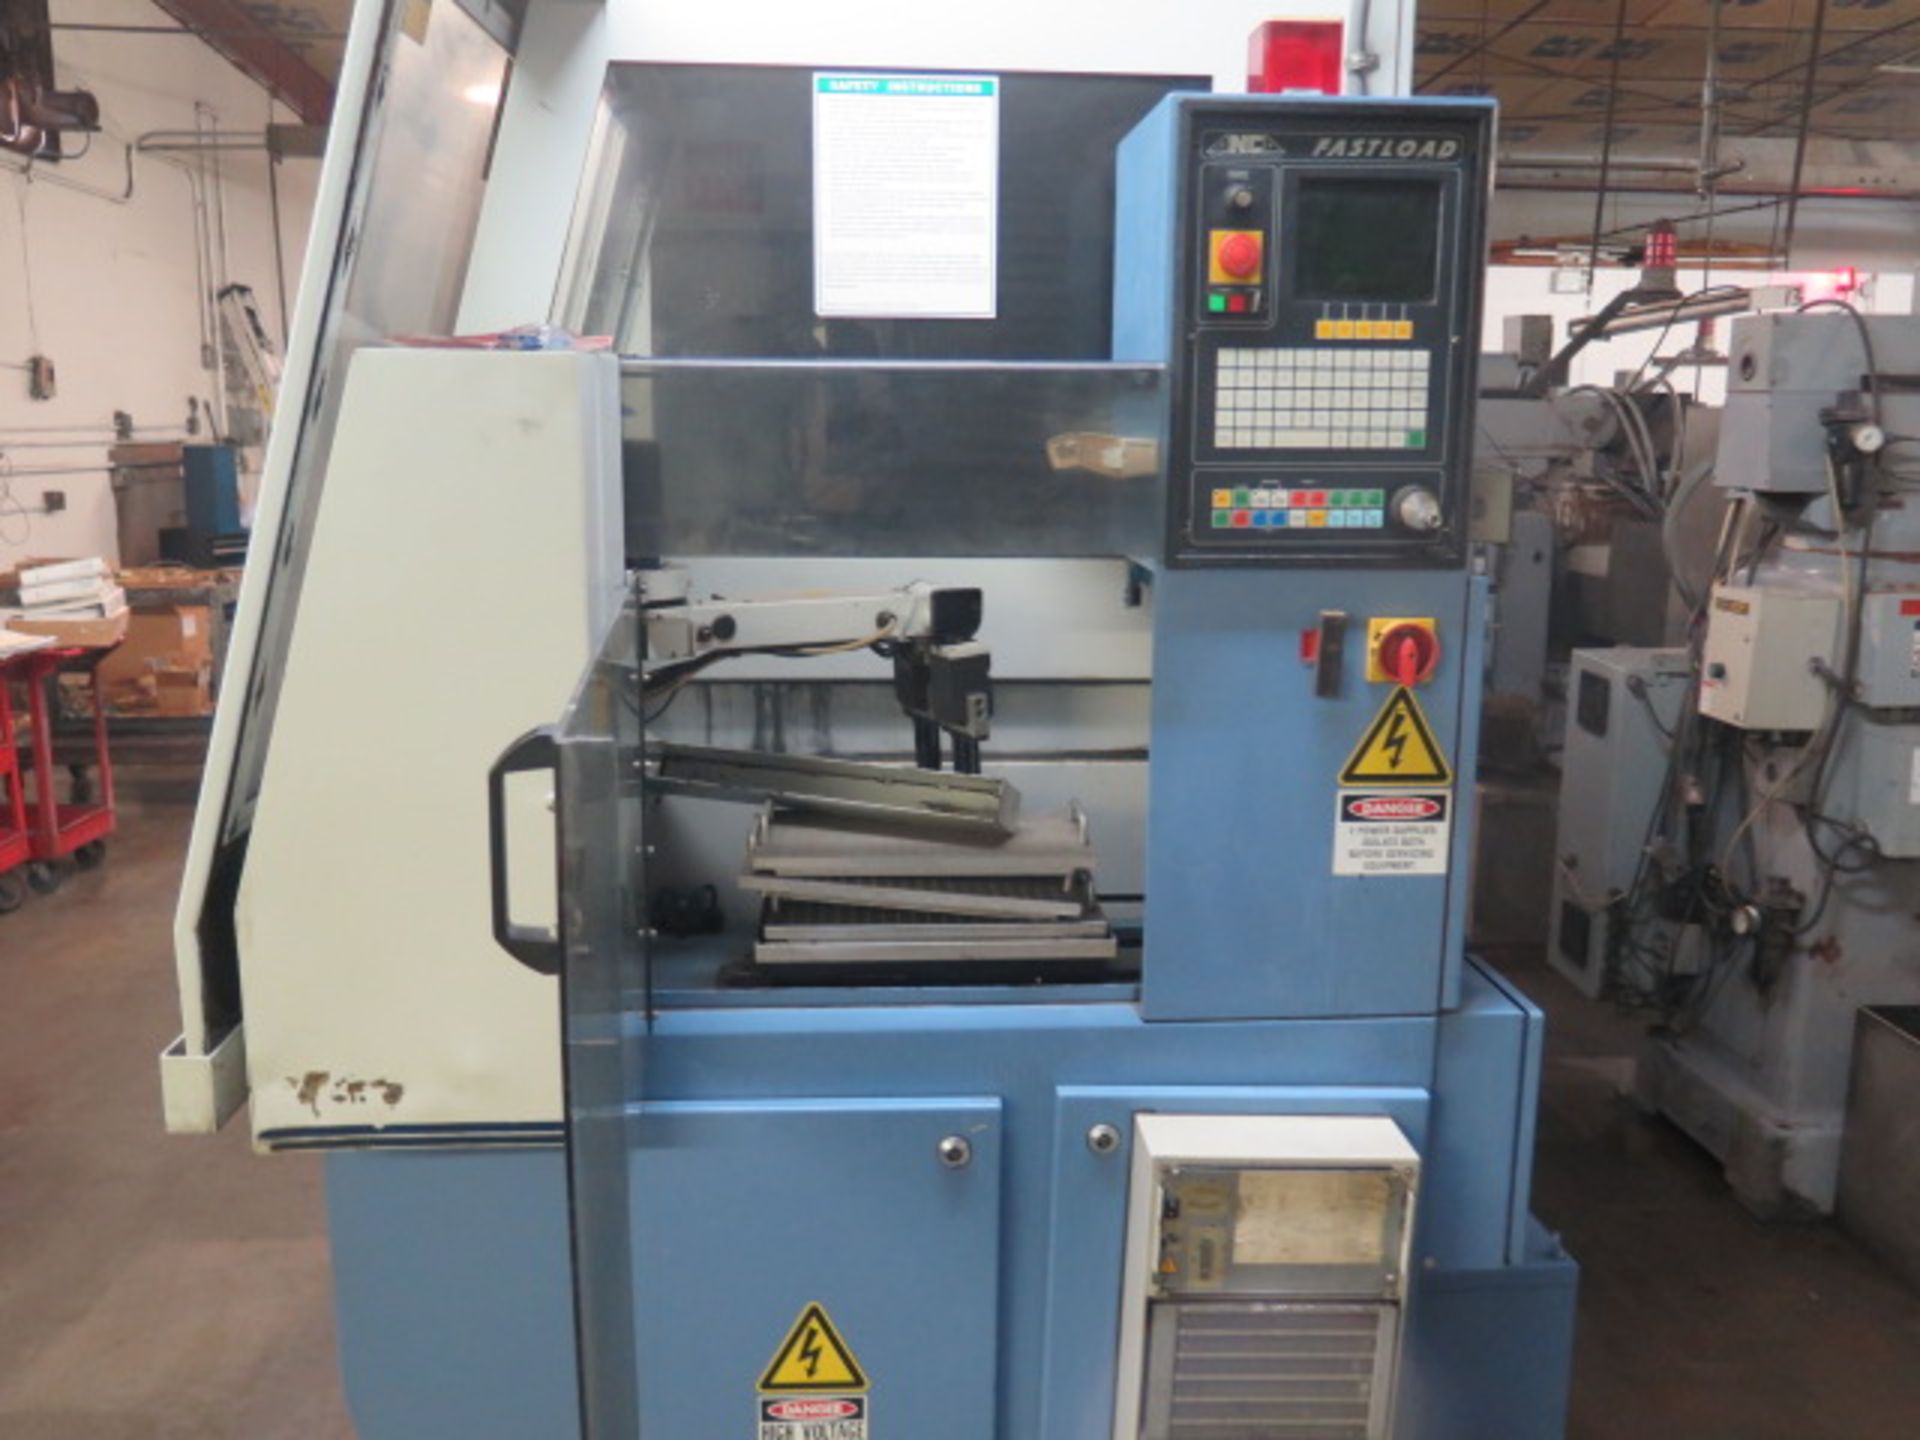 1997 Anca MG7 “Fastgrind” 7-Axis CNC Tool & Cutter Grinder w/ Anca Controls, Steady Rest, SOLD AS IS - Image 14 of 21